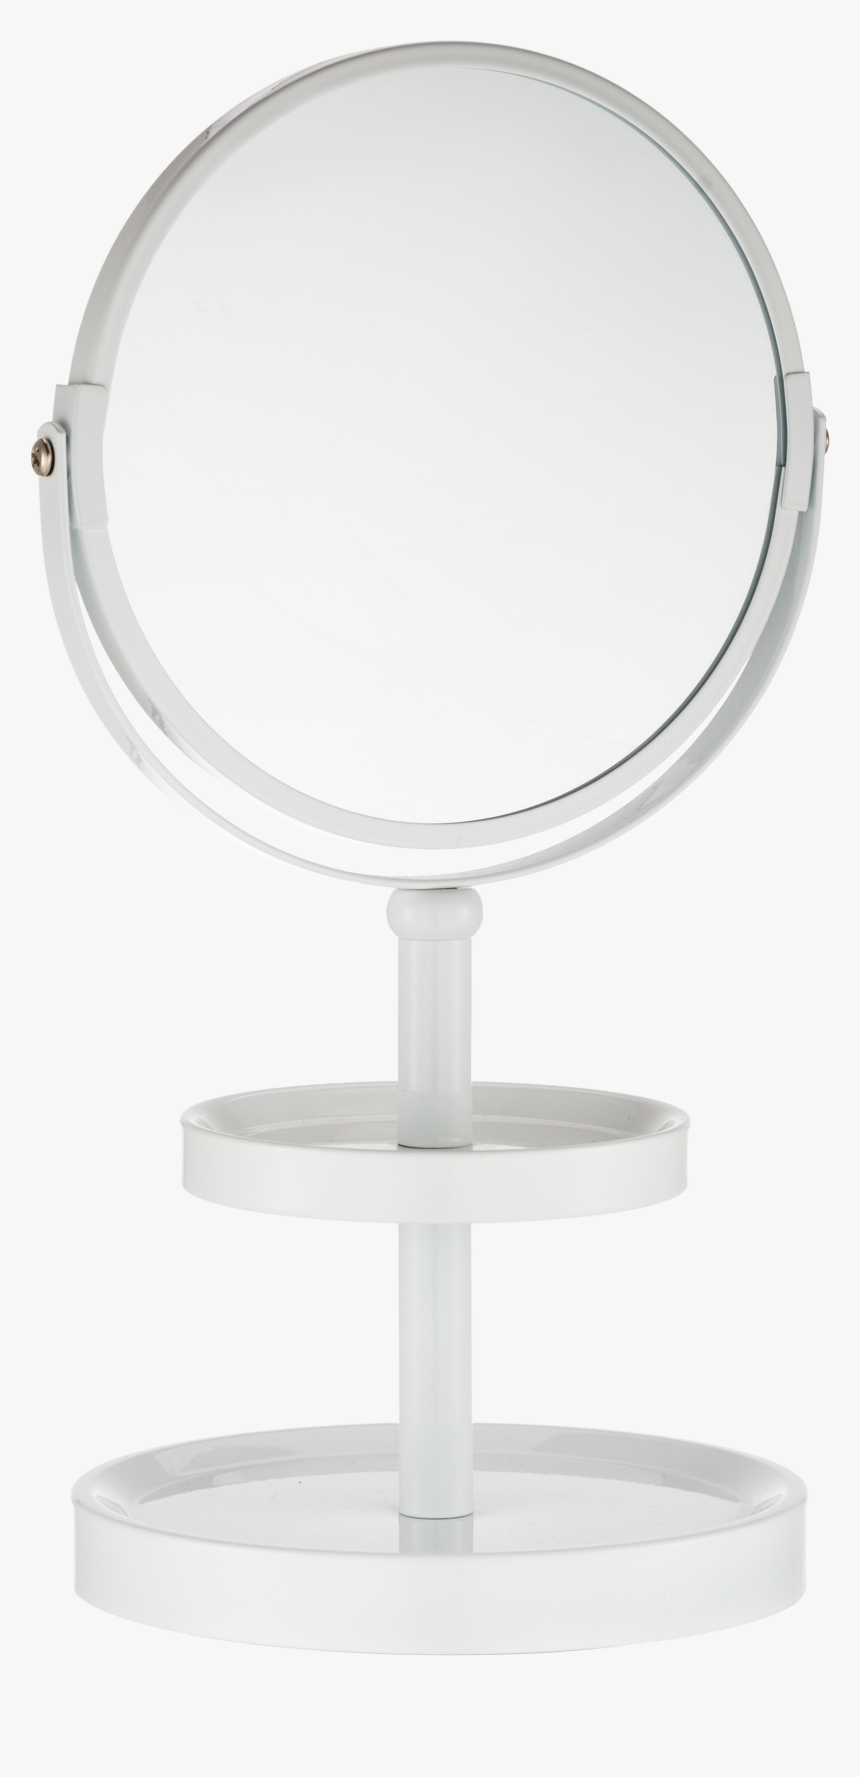 Standing Mirror Png, Transparent Png, Free Download